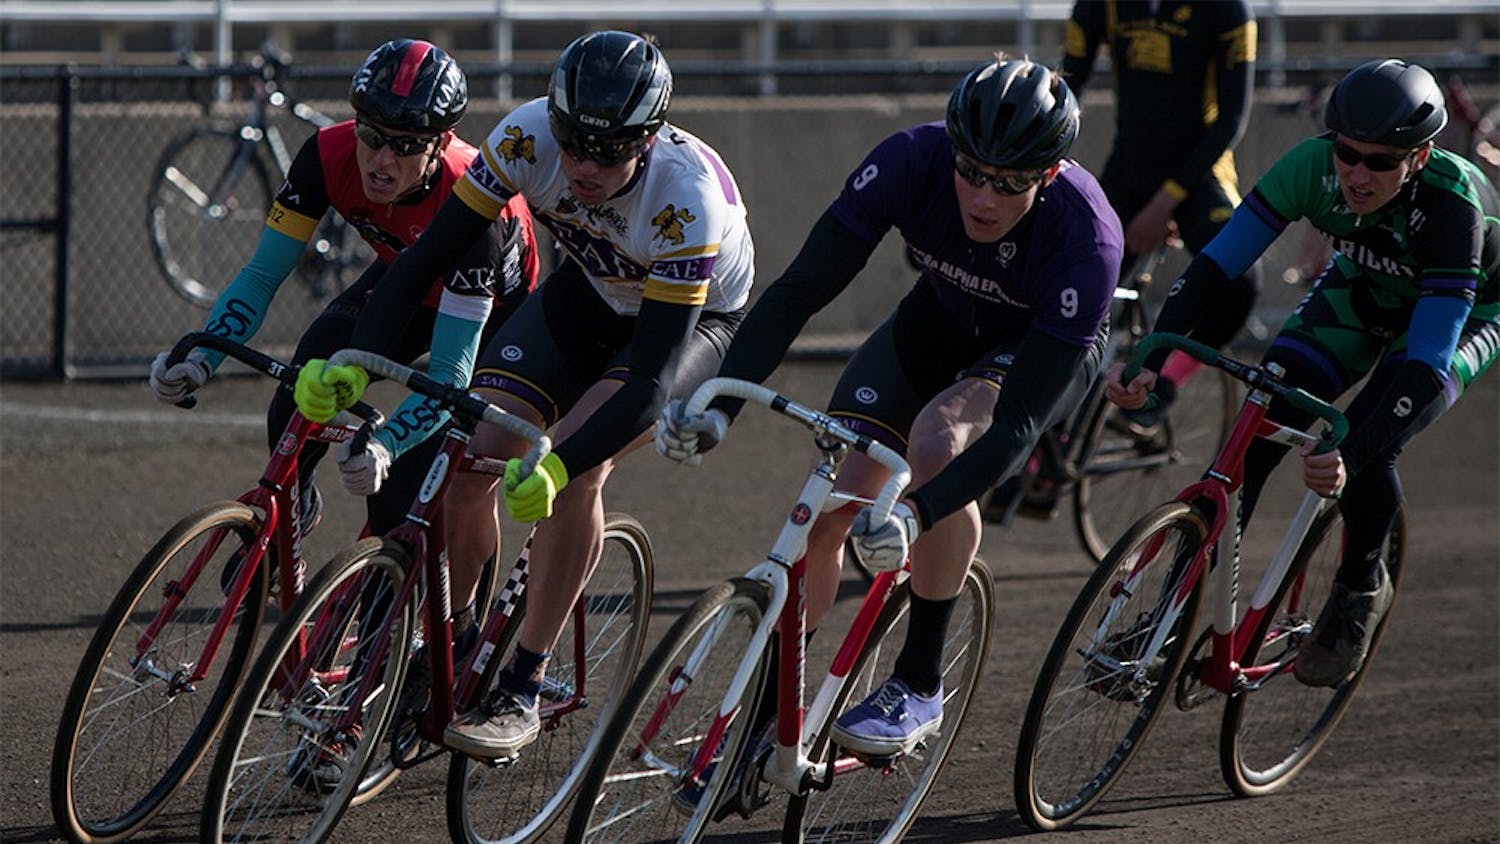 From left to right, Luke Tormoehlen of Delta tau Delta, Andrew and Joe Krahulik of Sigma Alpha Epsilon and Riley Figg of Wright Cycling ride through the first turn at Bill Armstrong Stadium during Miss N Out on Saturday. Joe Krahulik placed first for the men's race, followed closely by his brother Andrew.